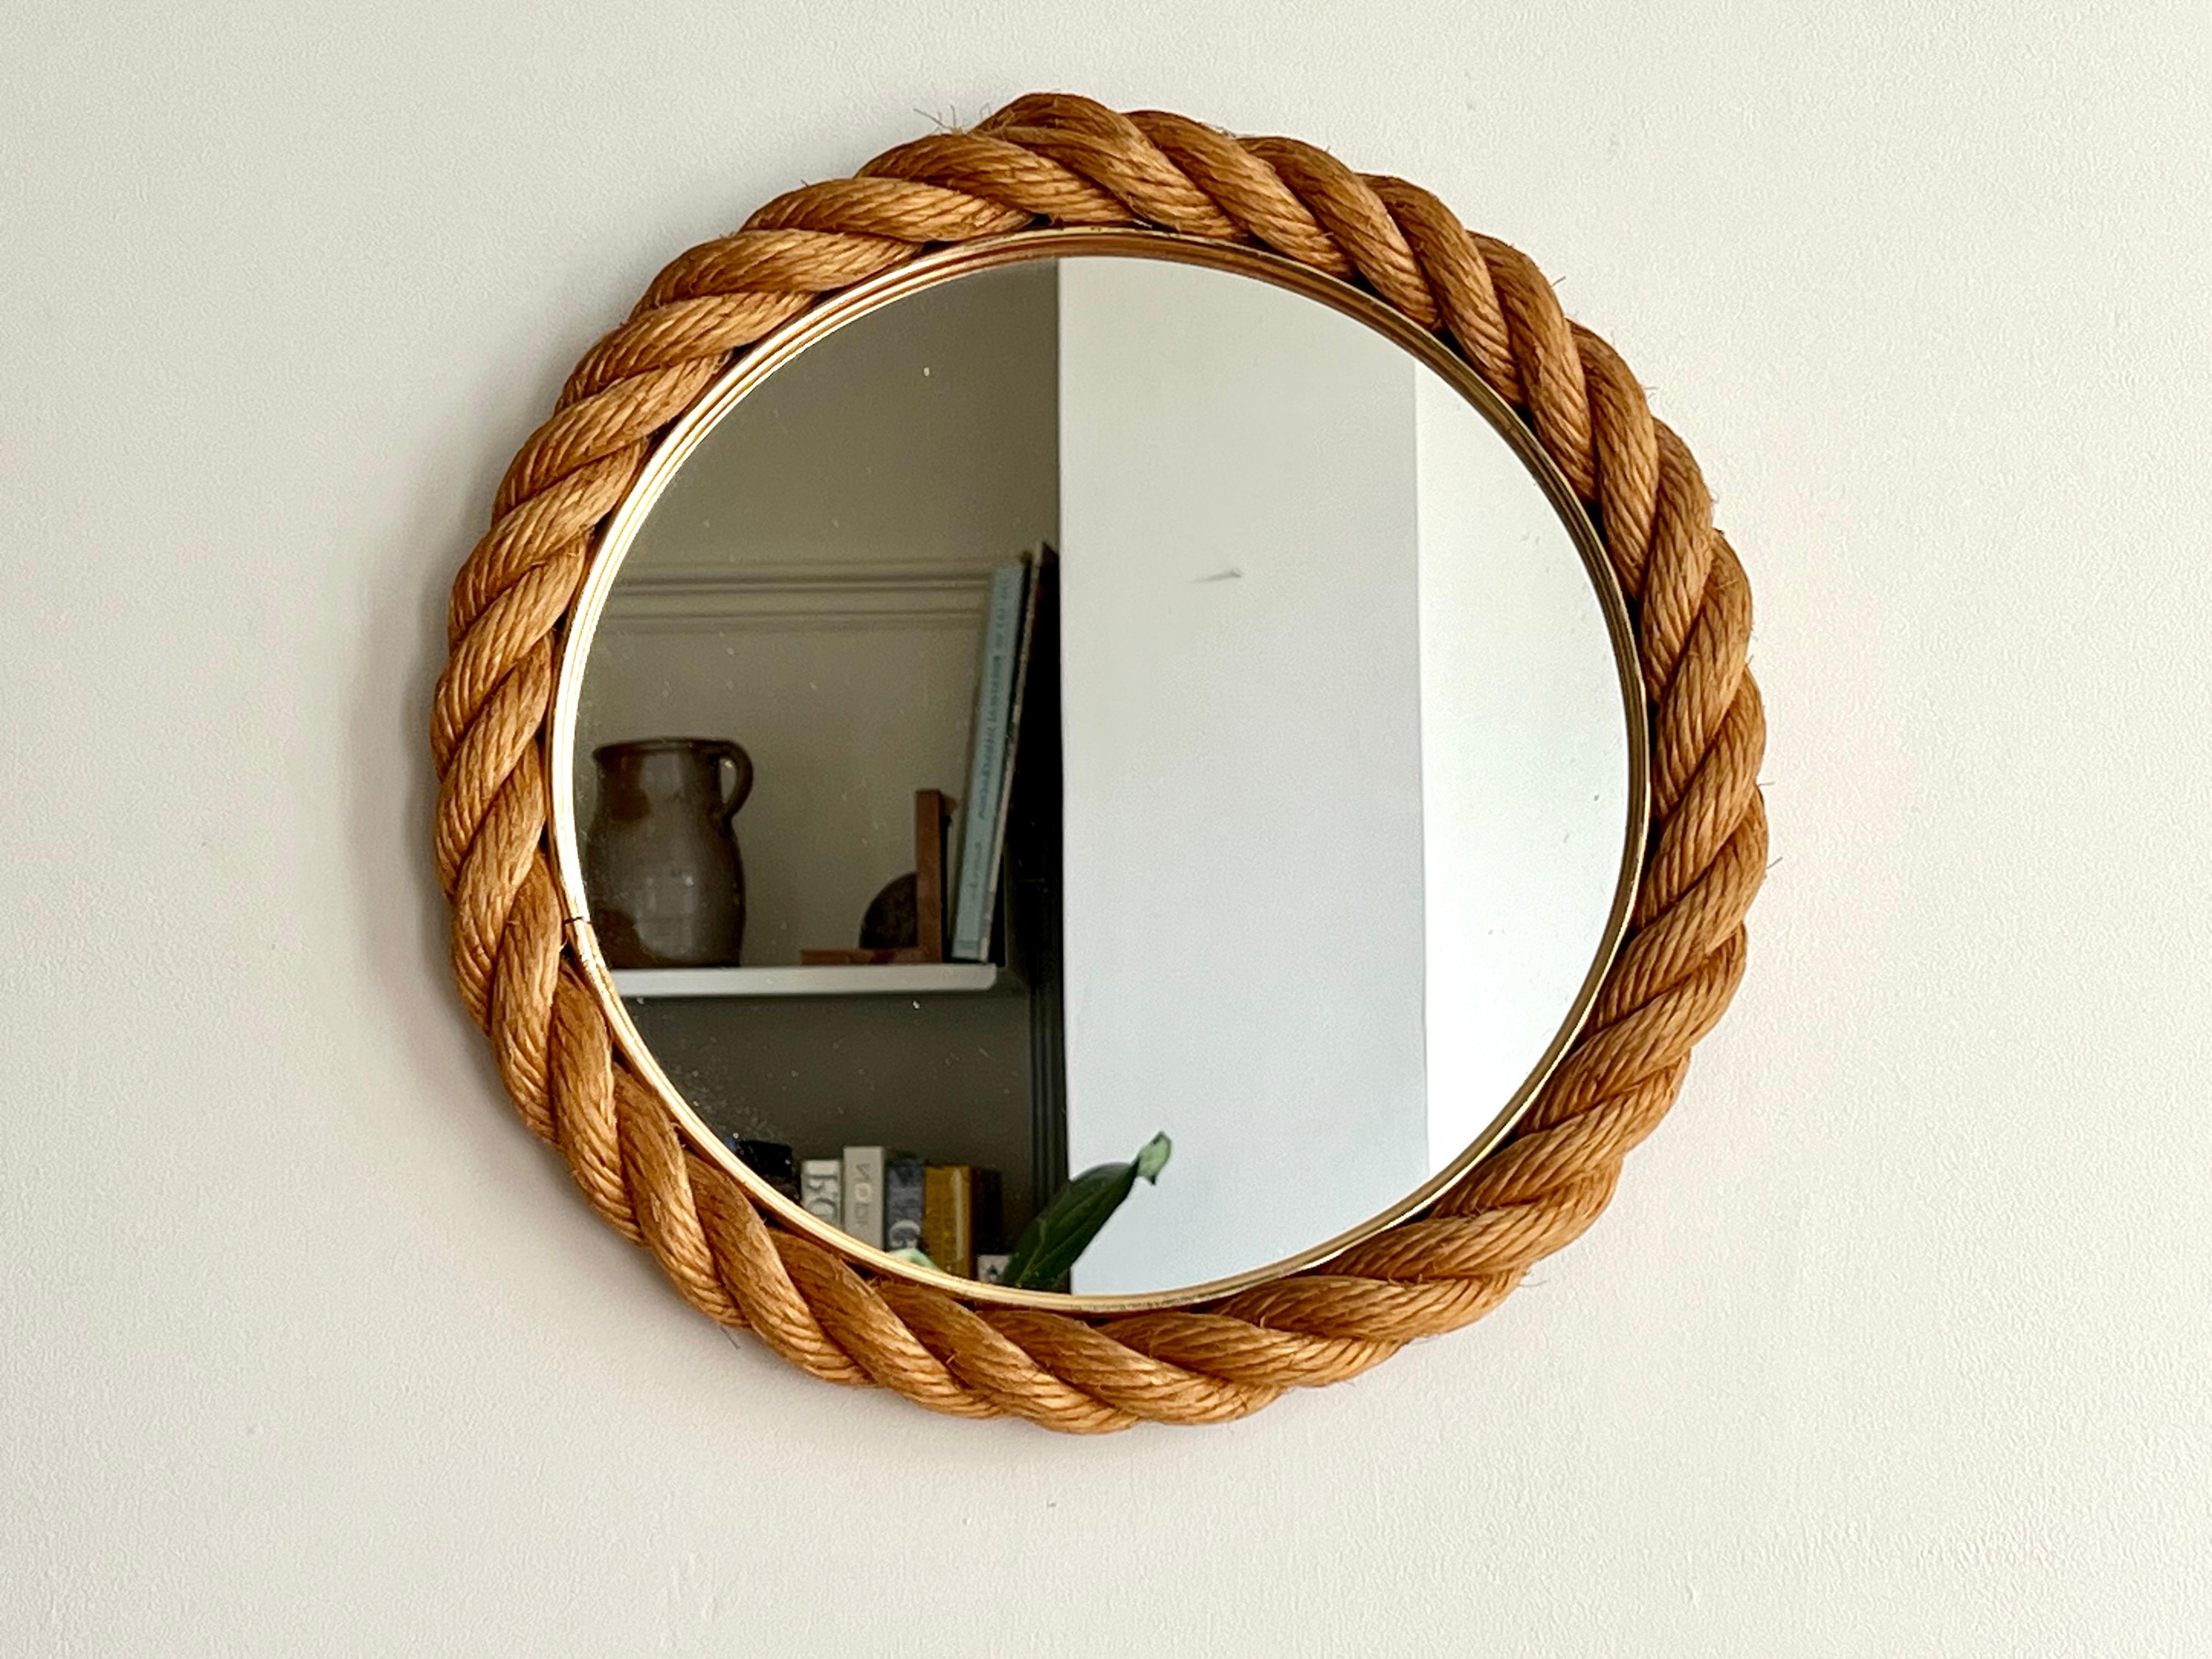 Rope Frame Mirror, Audoux & Minet, France, 1950-1960 For Sale 5